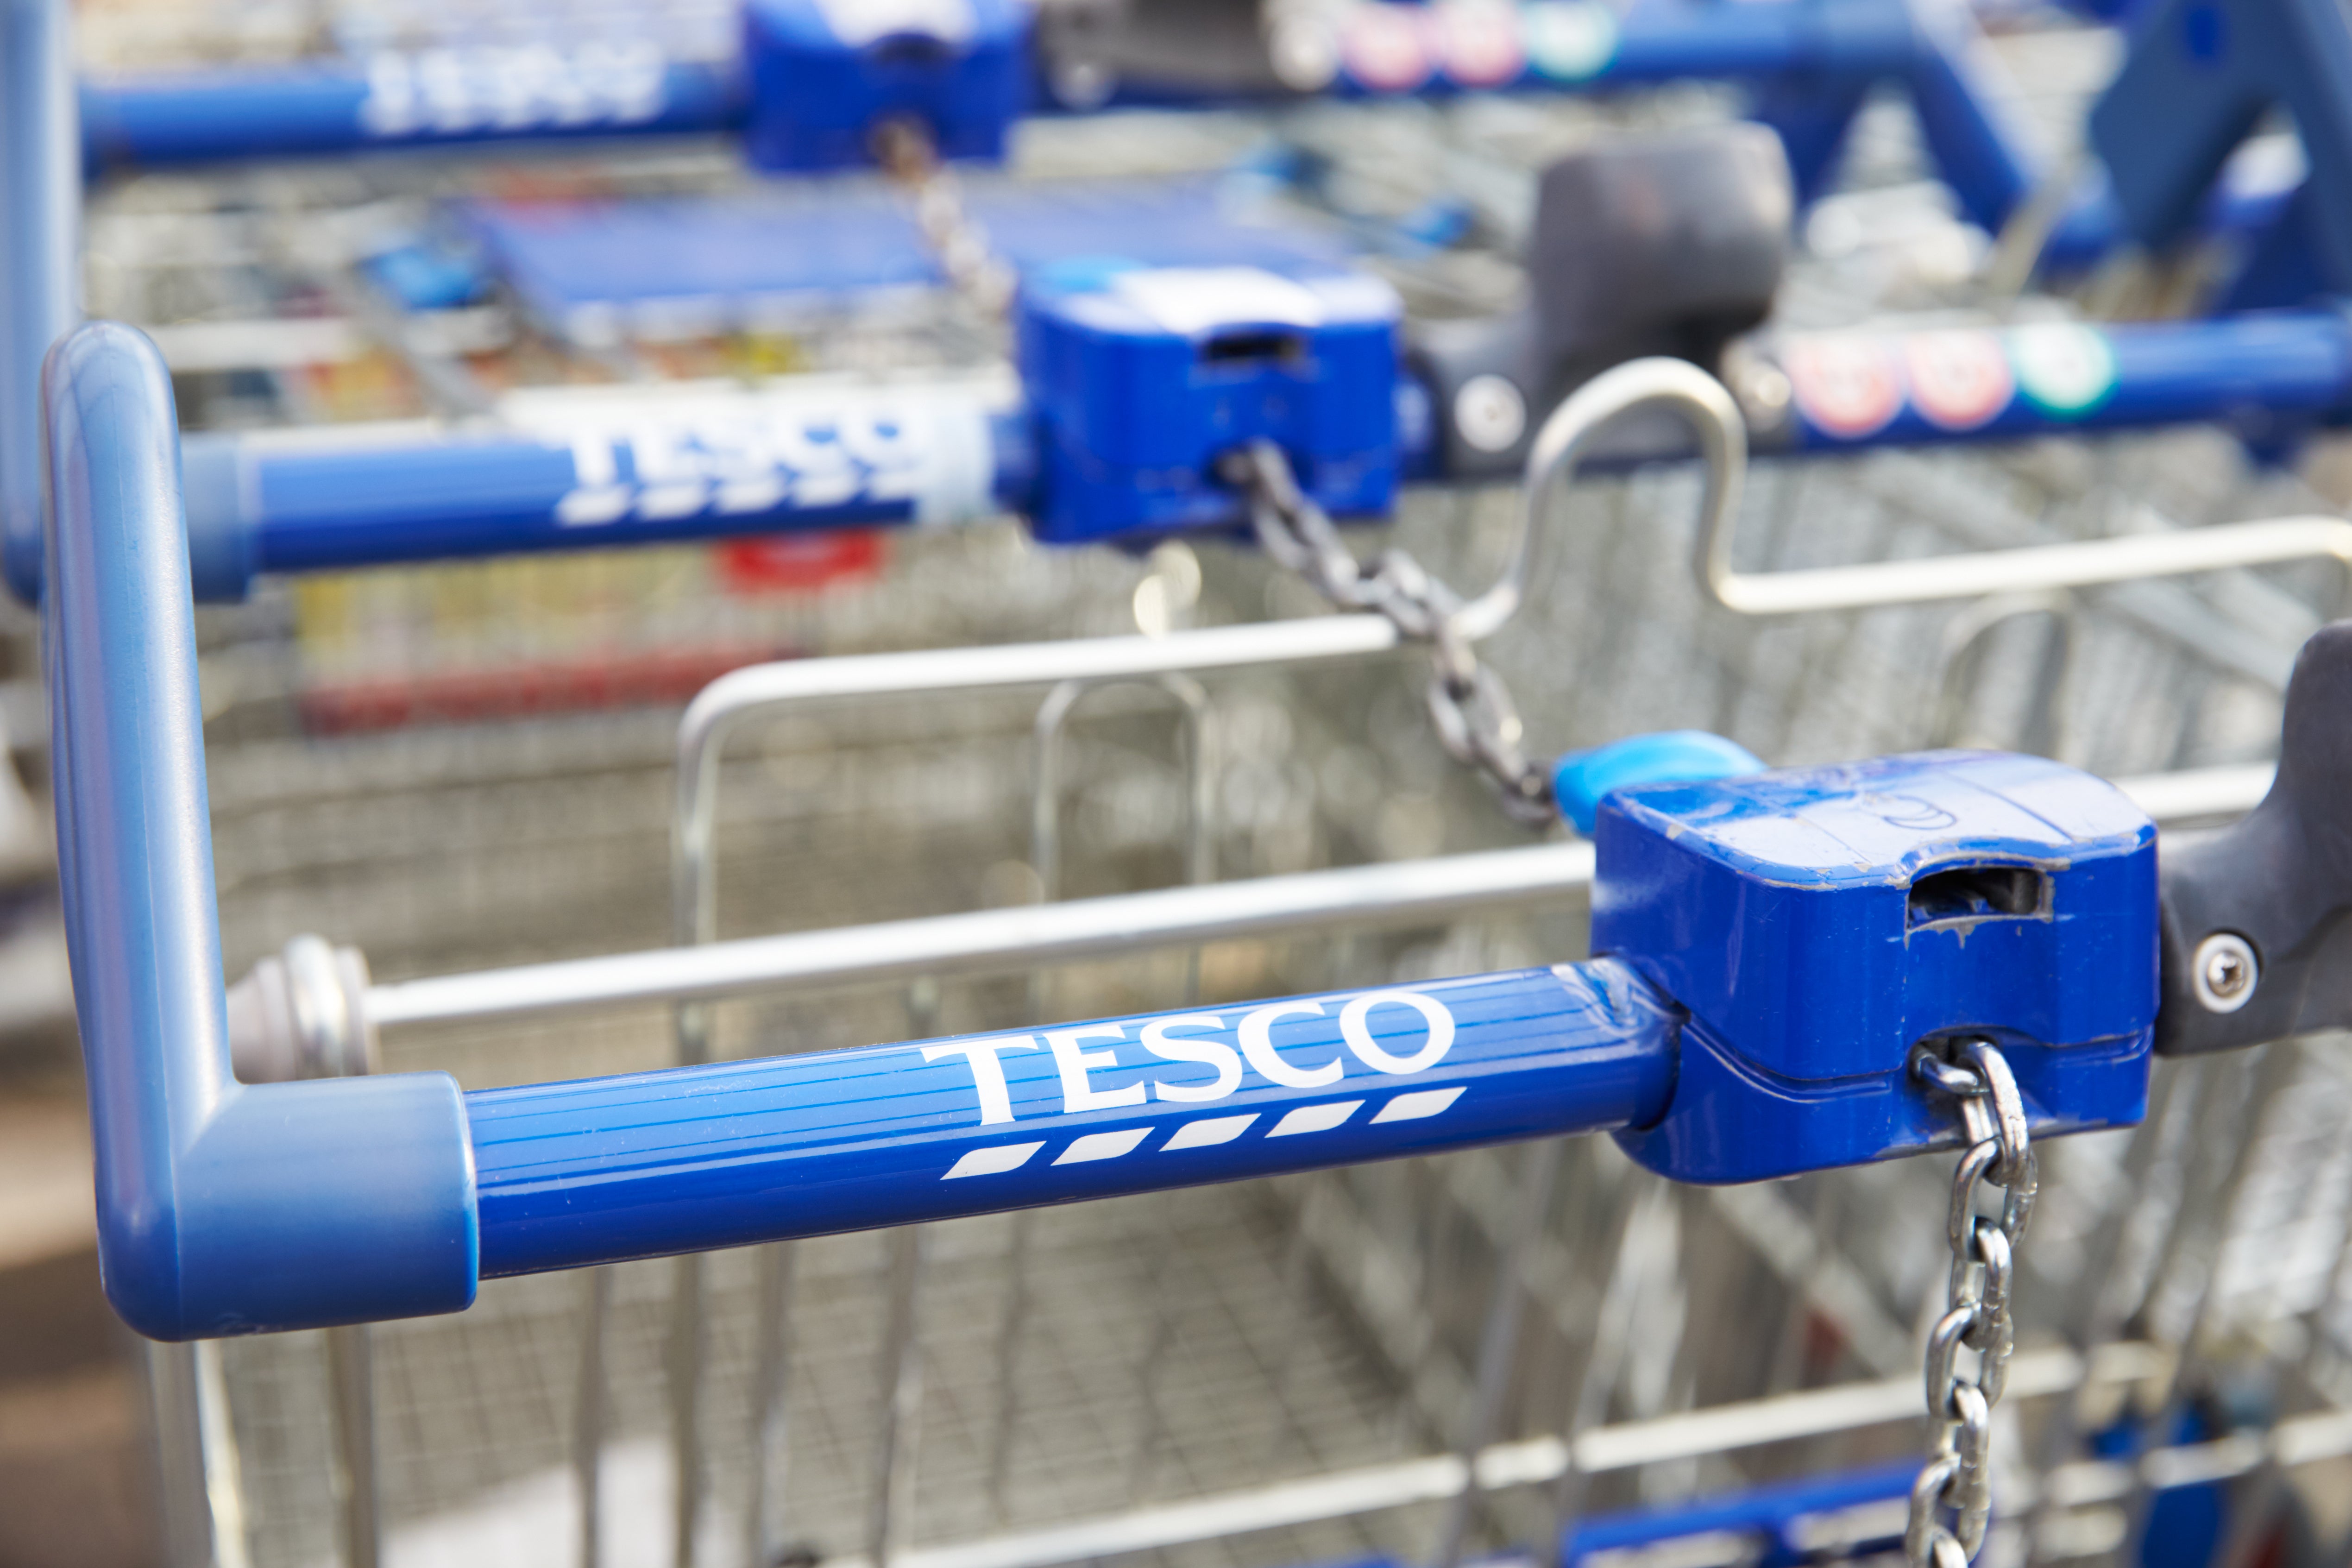 ‘The Clubcard Christmas Savers is a savvy way to spread the cost of Christmas,’ Tesco CCO says